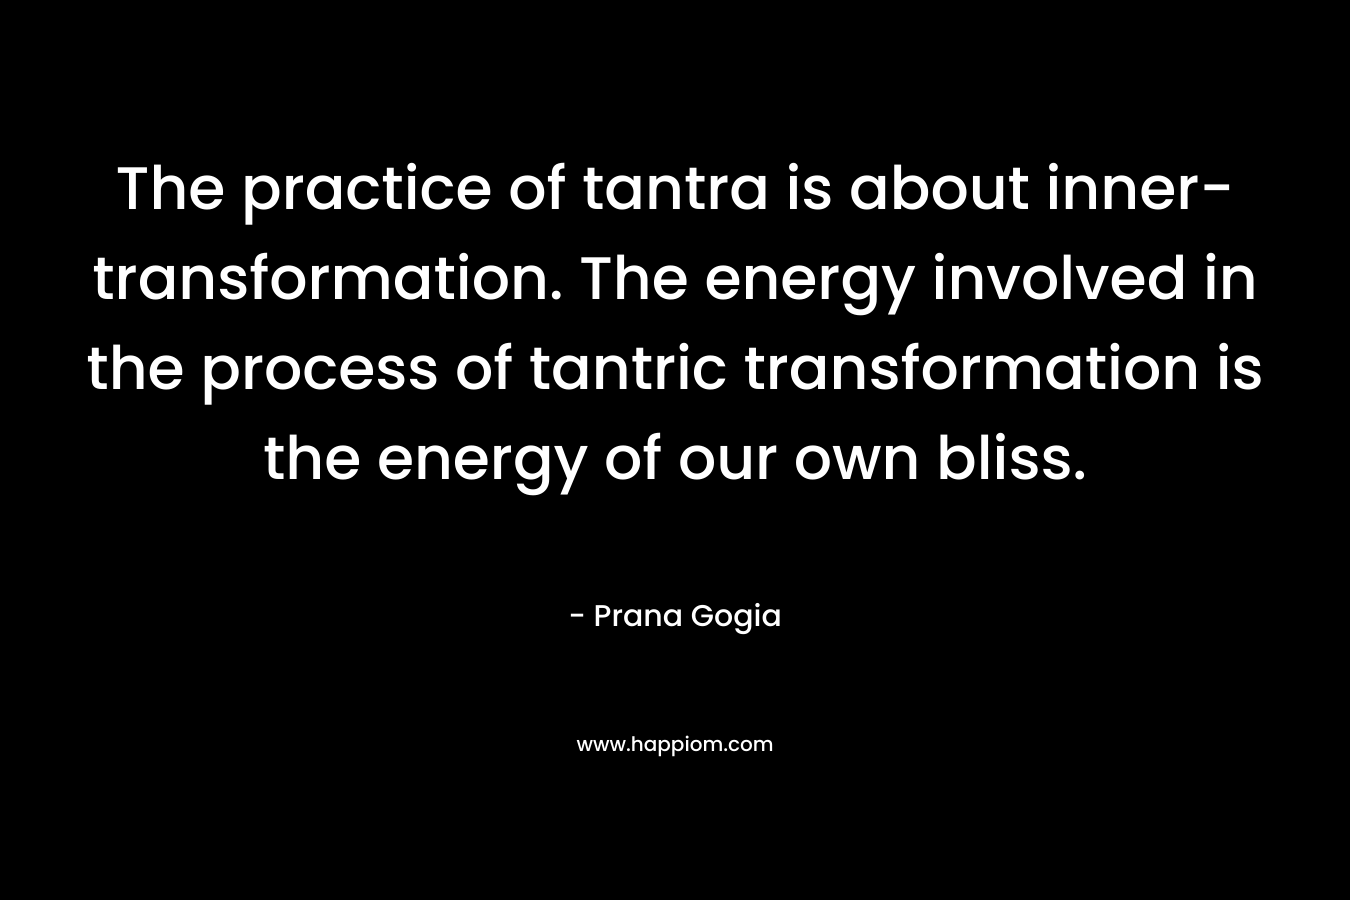 The practice of tantra is about inner-transformation. The energy involved in the process of tantric transformation is the energy of our own bliss.